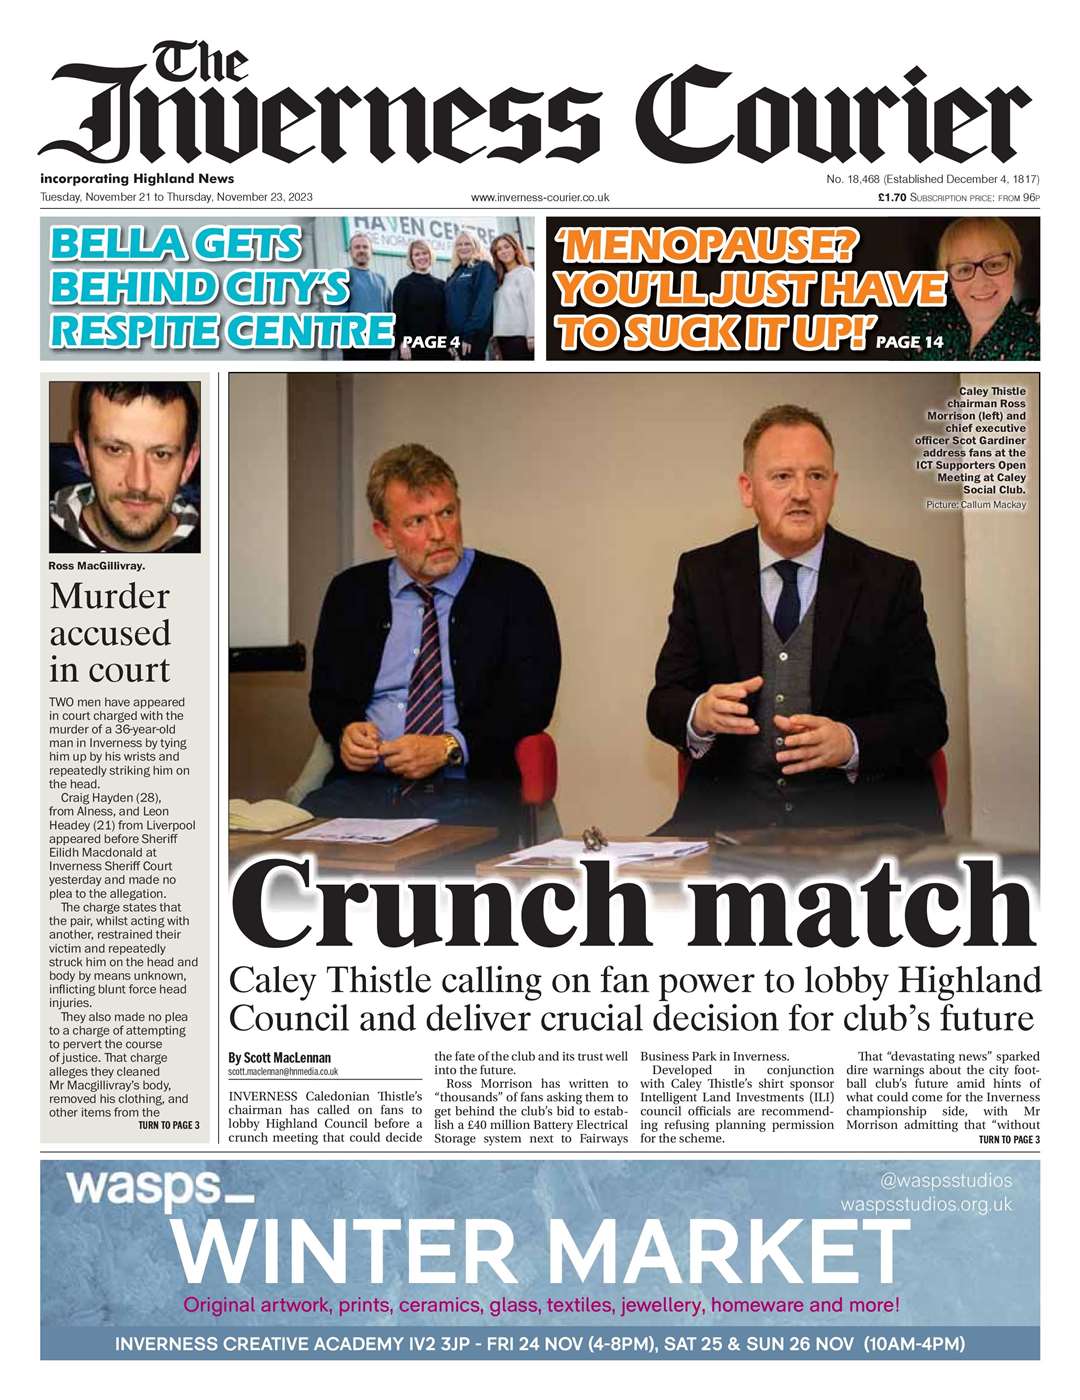 The Inverness Courier, November 21, front page.